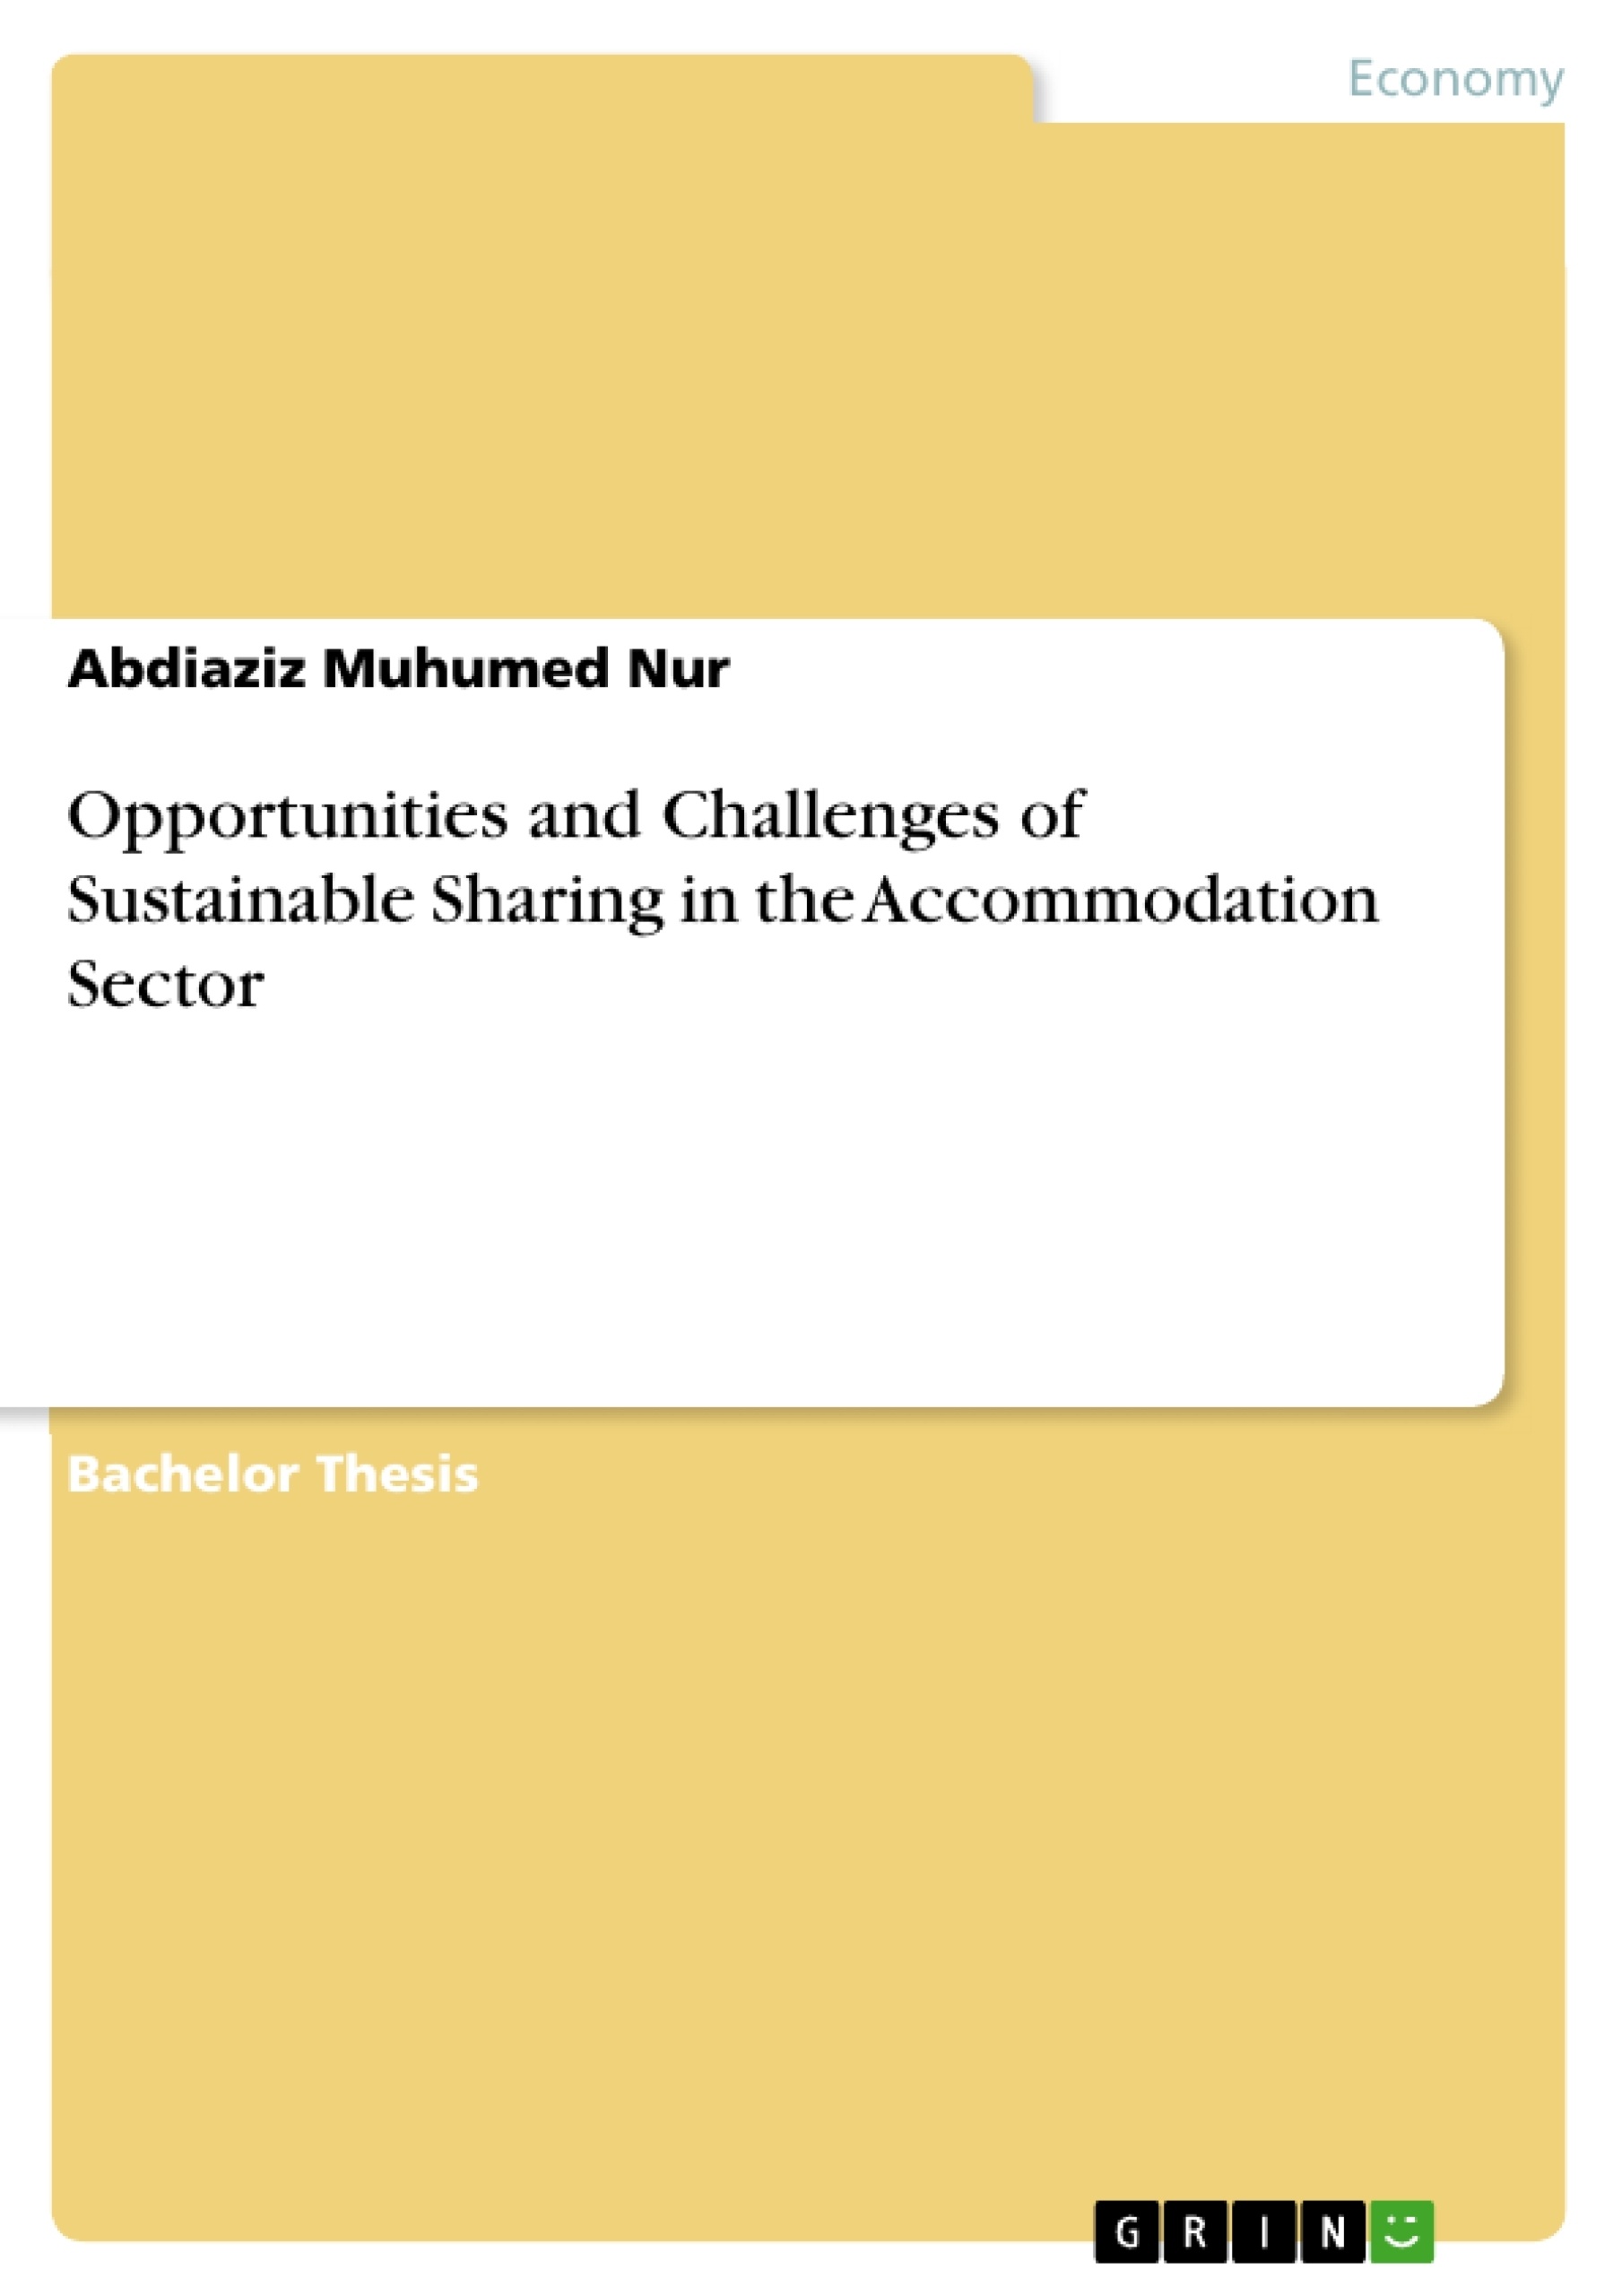 Título: Opportunities and Challenges of Sustainable Sharing in the Accommodation Sector